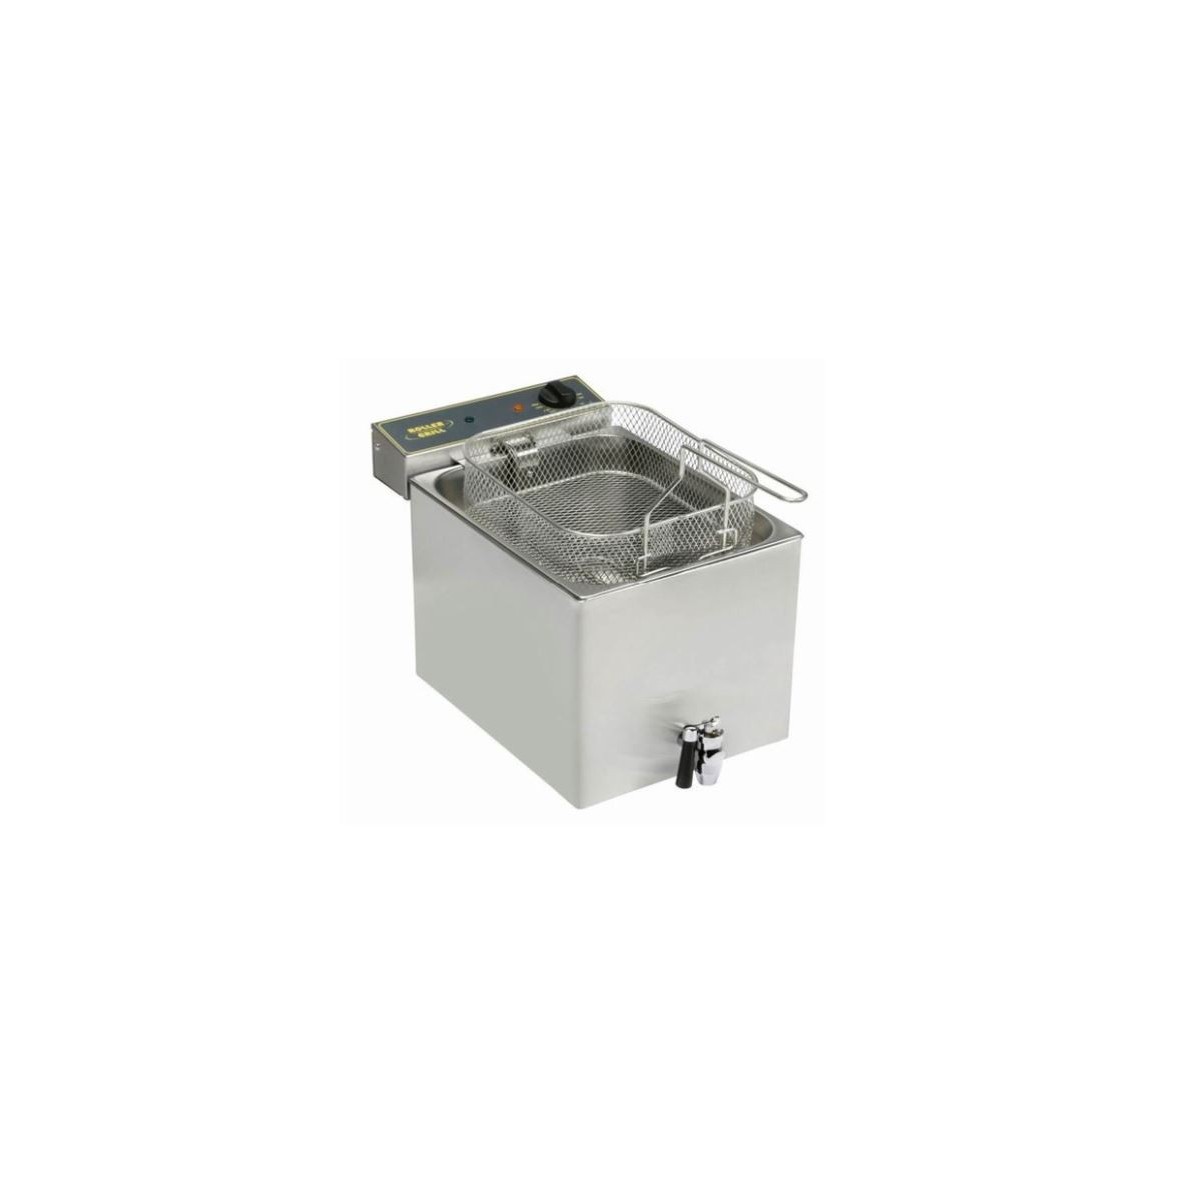 ROLLER GRILL SINGLE FRYER WITH TAP 12L 380V